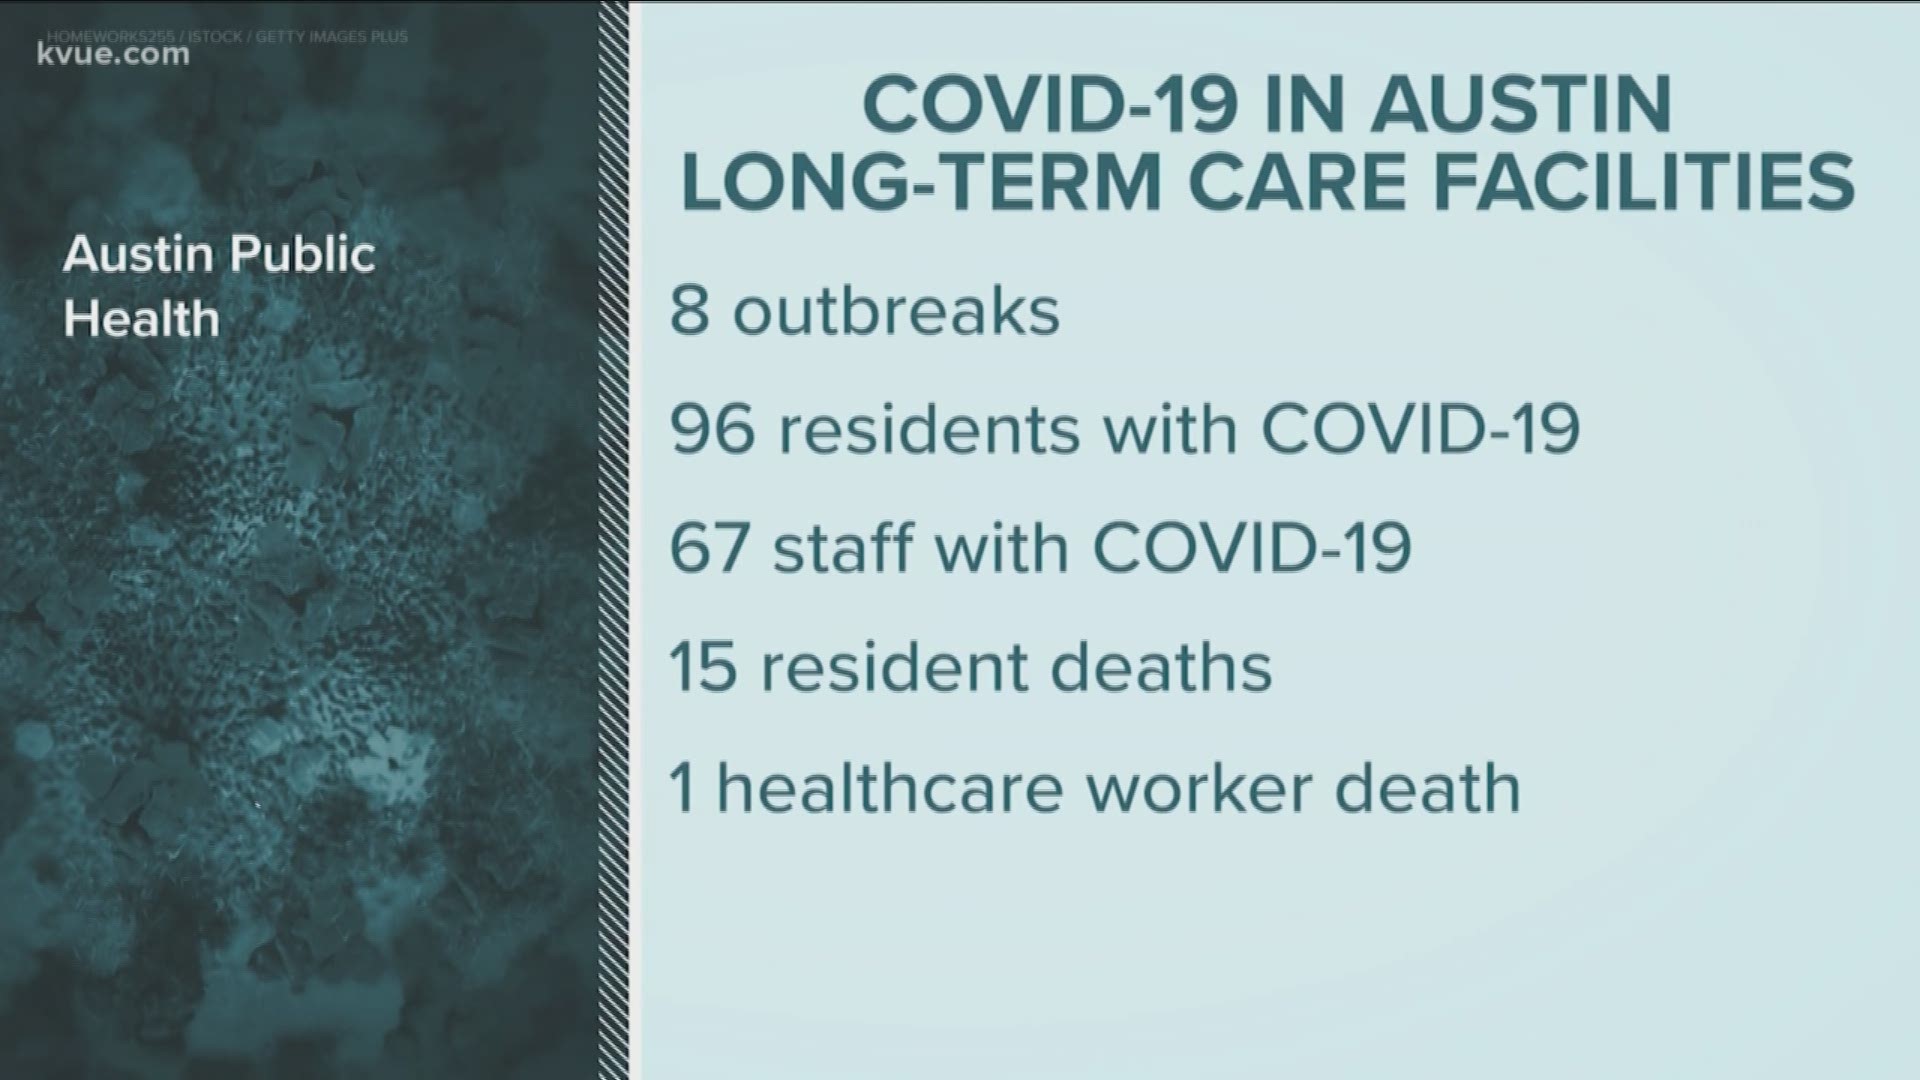 There have been 164 coronavirus-related deaths in Texas nursing homes as of April 22.